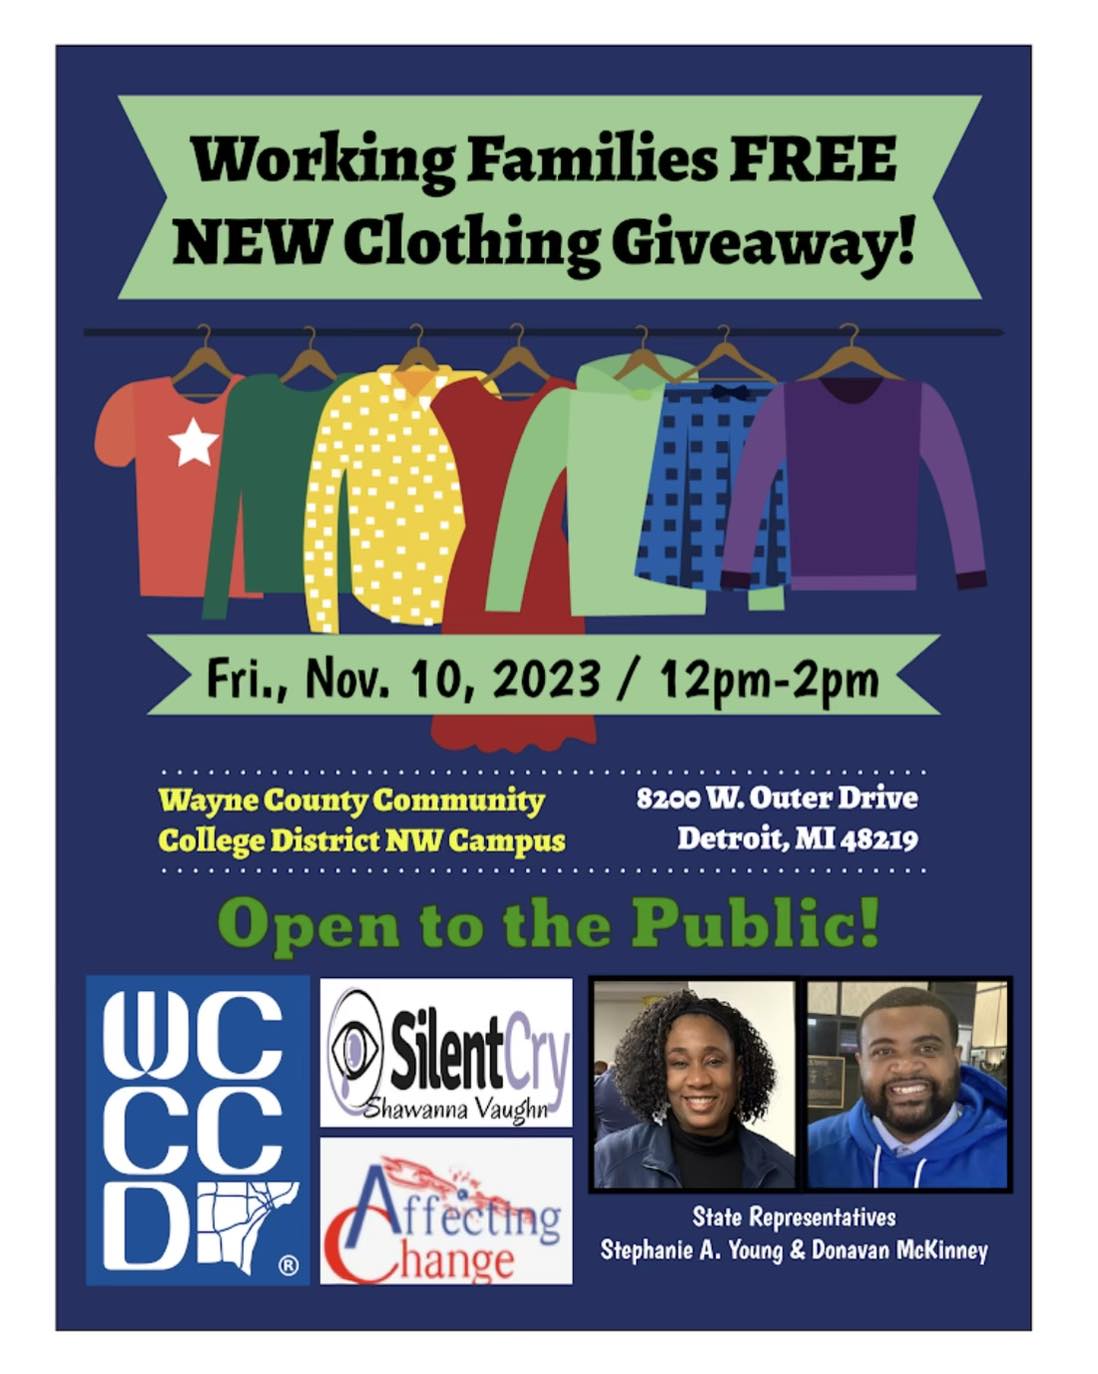 Working Families Clothing Giveaway